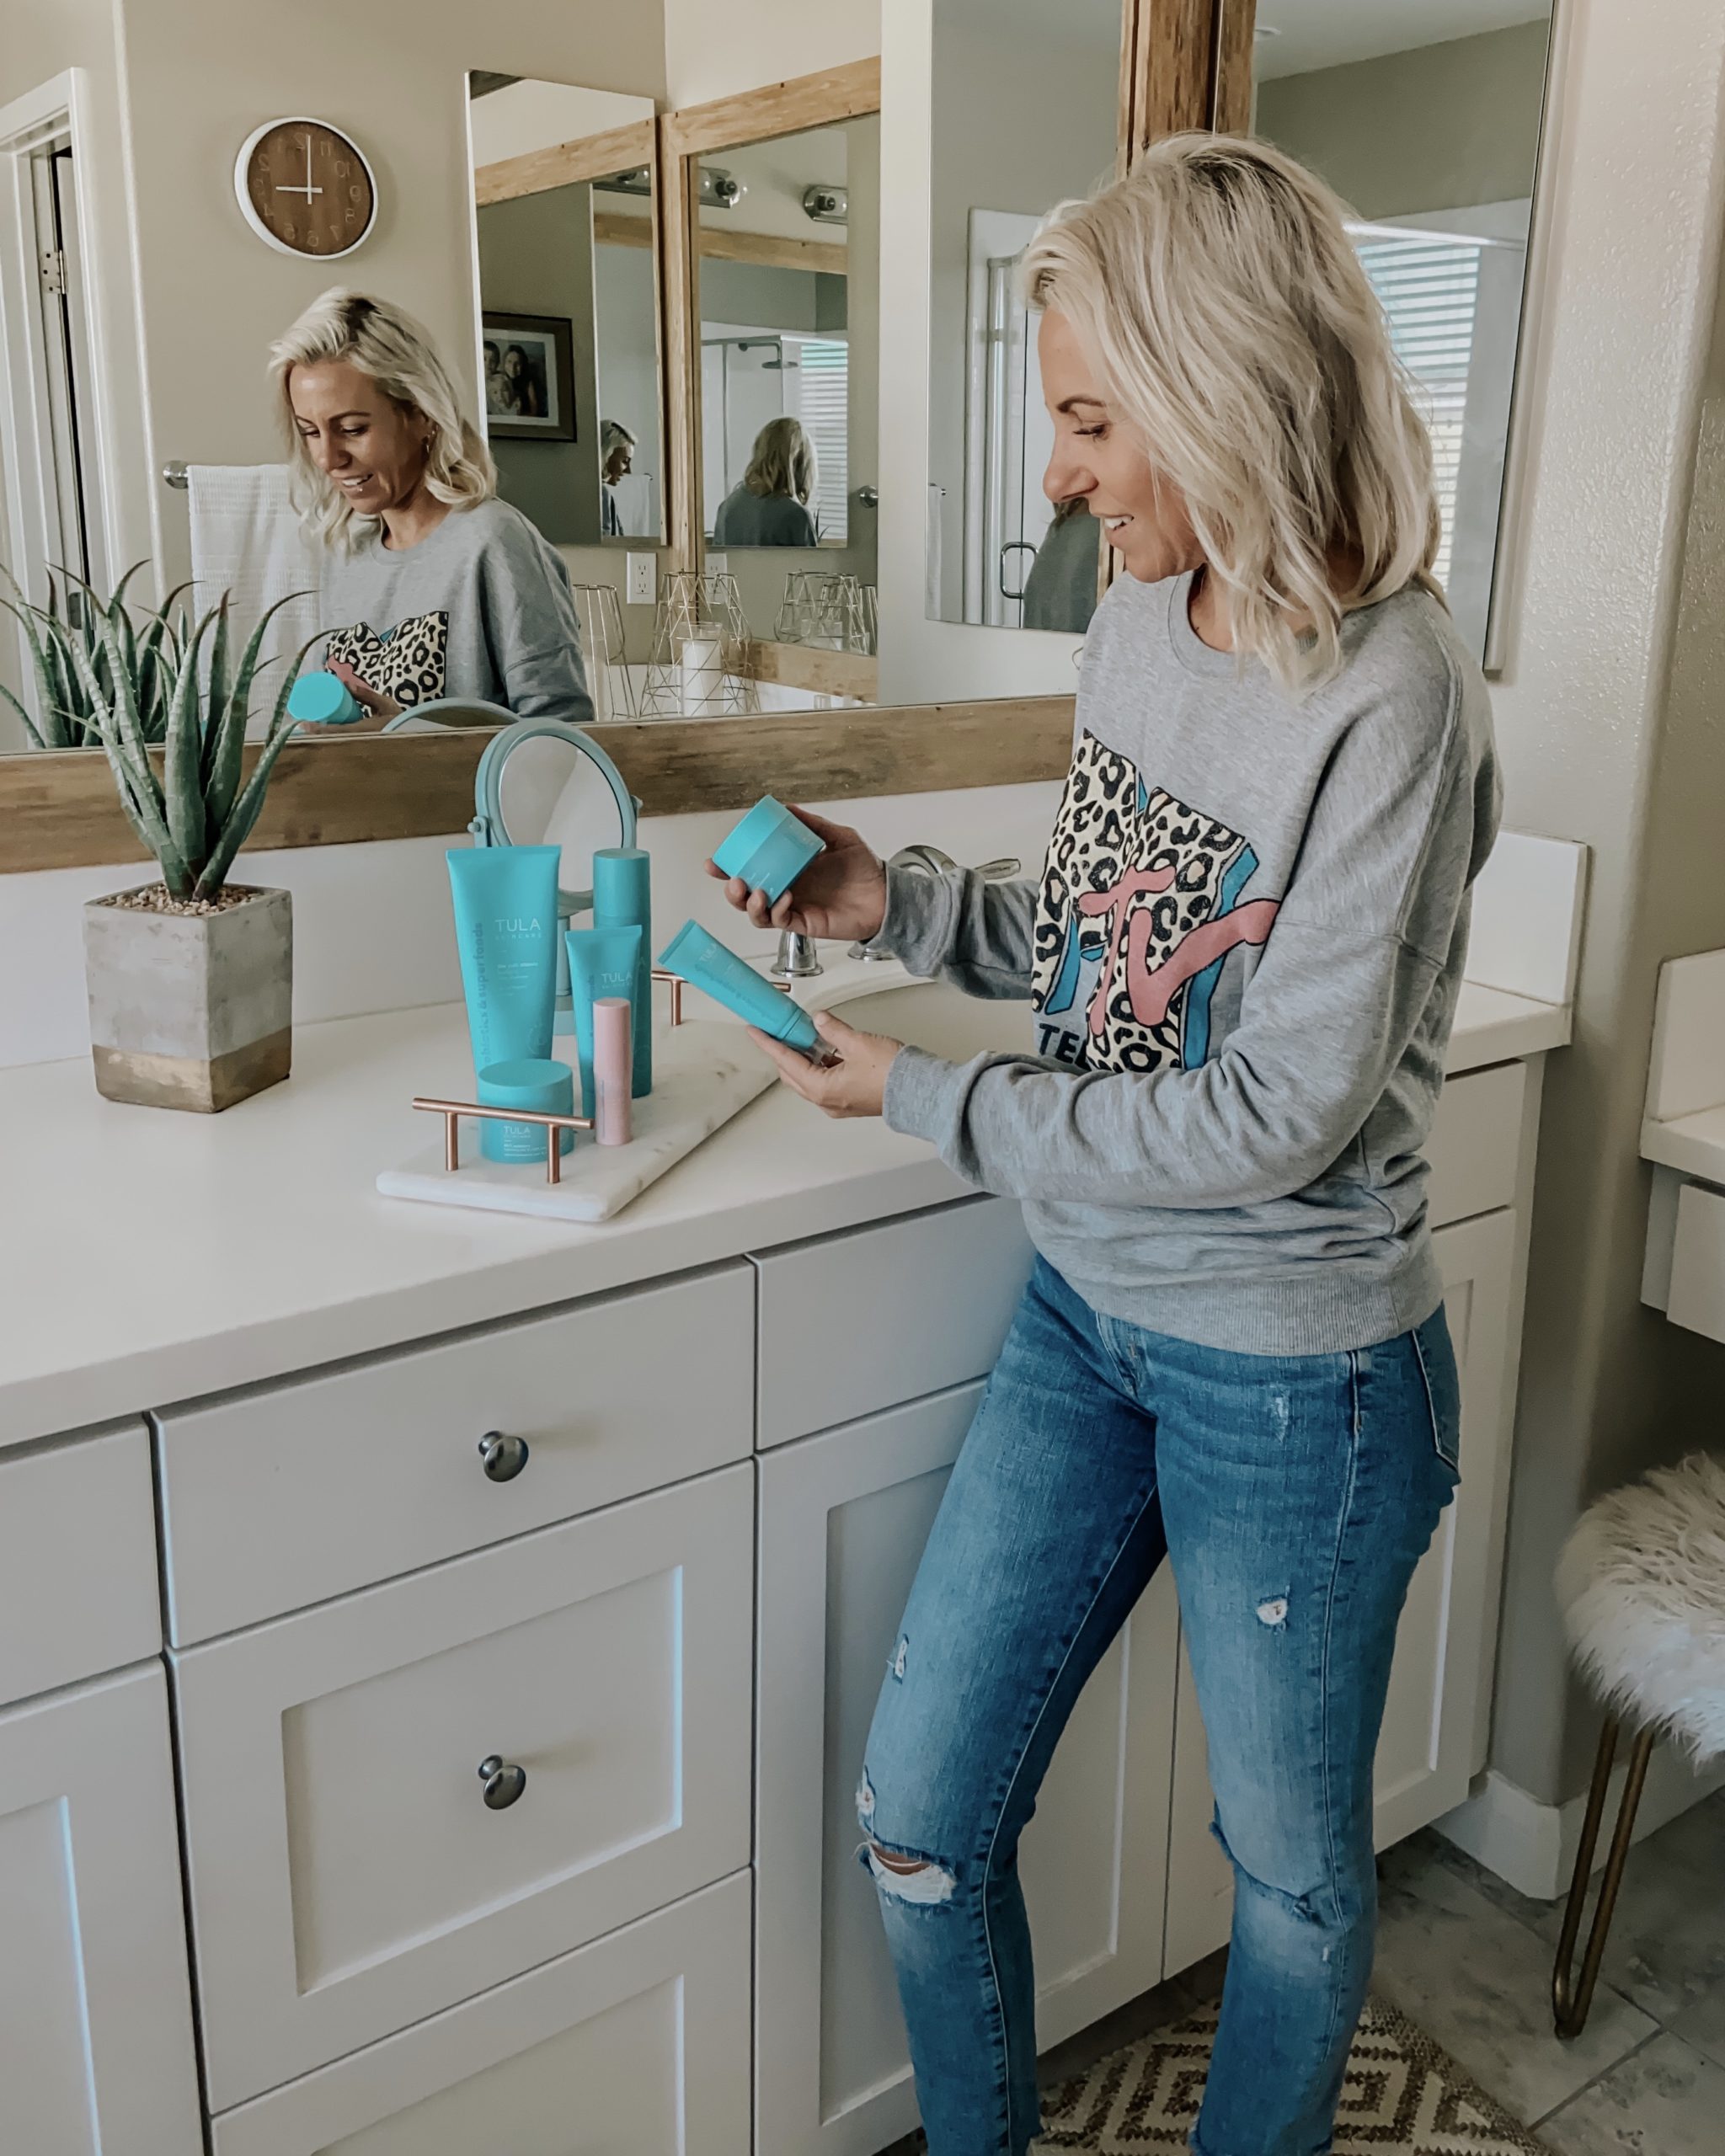 TULA FAVORITES- Jaclyn De Leon Style+ Tula is one of my absolute favorite skincare brands and since I have so many of their products I thought I would run down my top favorites